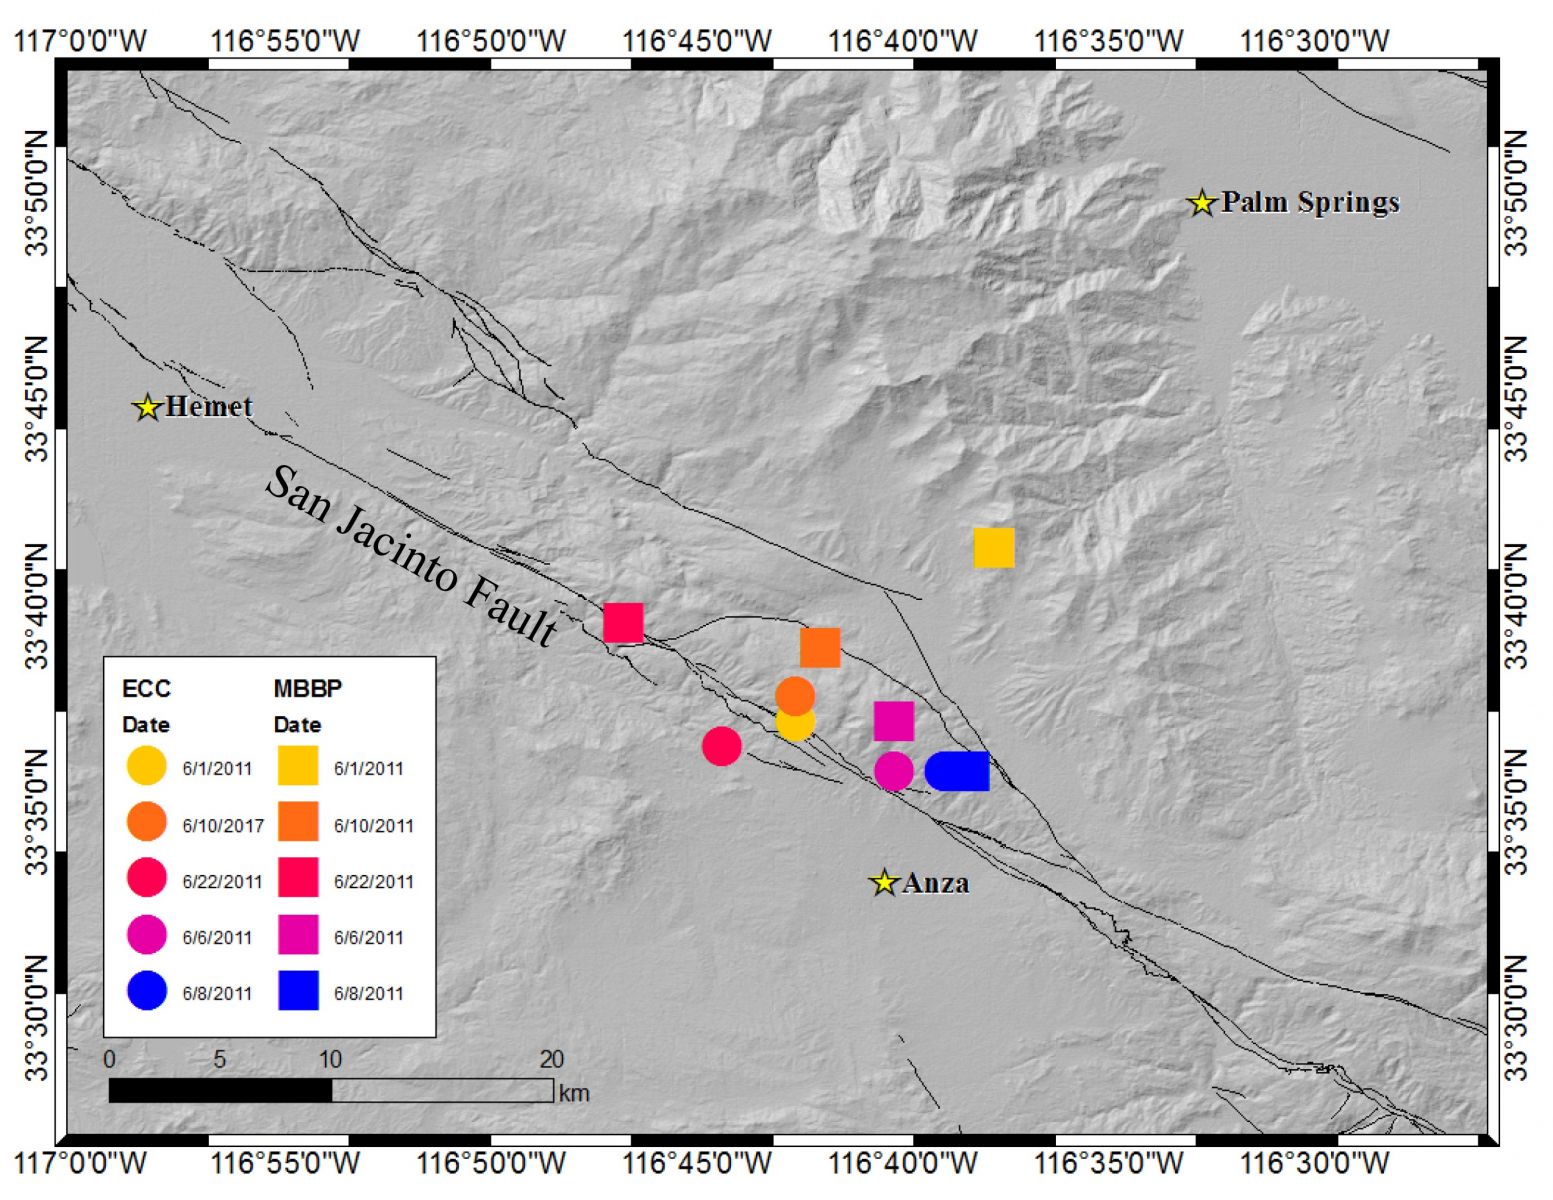 Locations of tectonic tremor (colored circles and squares) detected under the San Jacinto Fault by researchers at UCR.